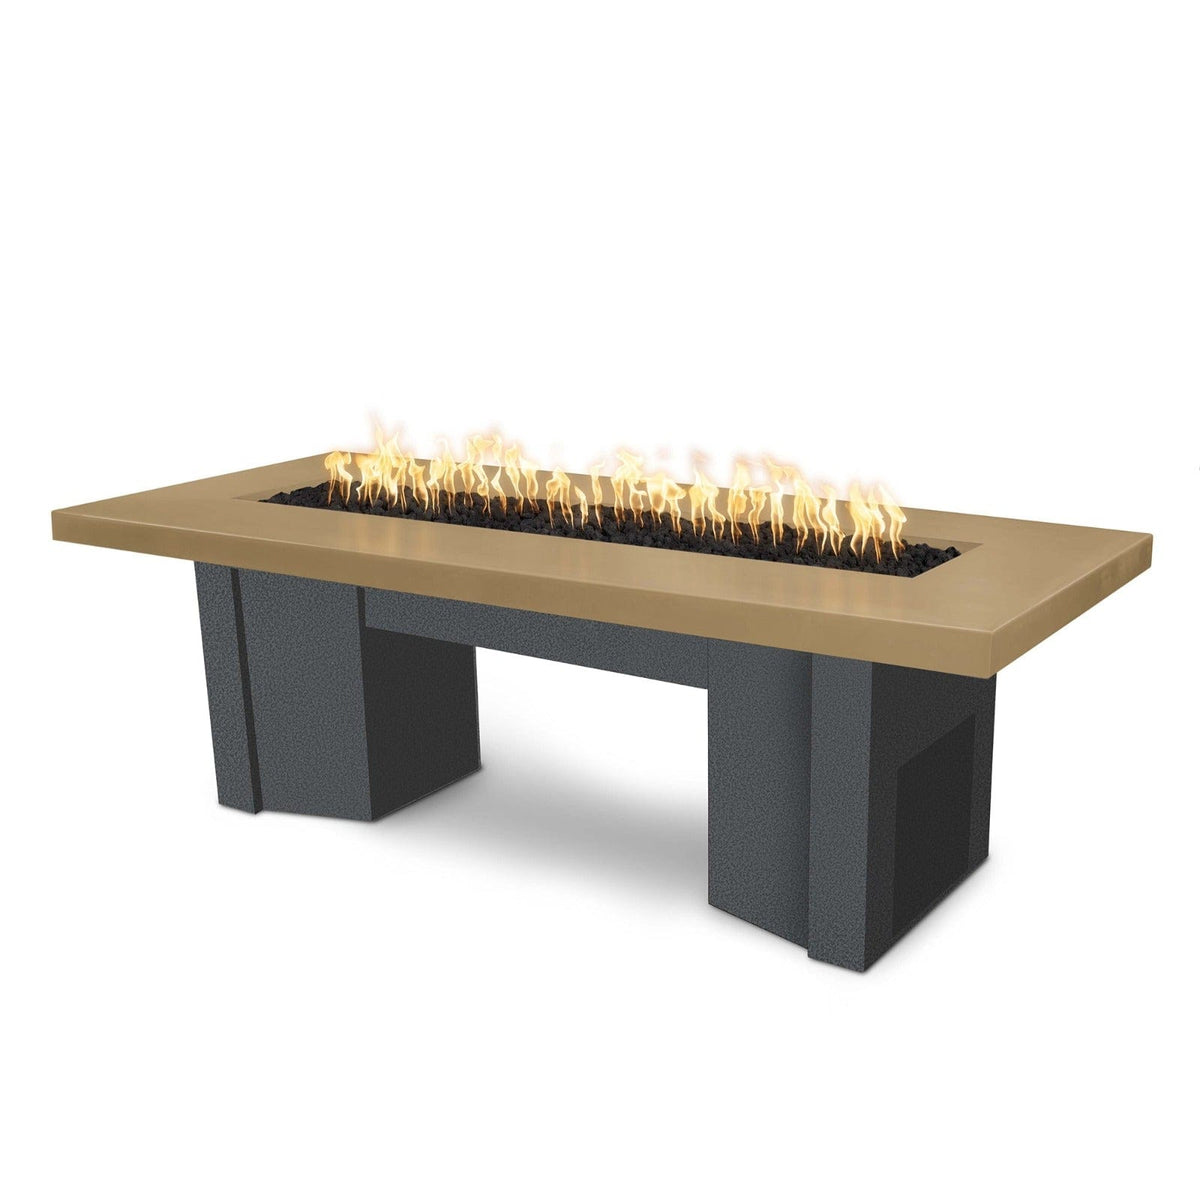 The Outdoor Plus Fire Features Brown (-BRN) / Silver Vein Powder Coated Steel (-SLV) The Outdoor Plus 60&quot; Alameda Fire Table Smooth Concrete in Liquid Propane - 12V Electronic Ignition / OPT-ALMGFRC60E12V-LP